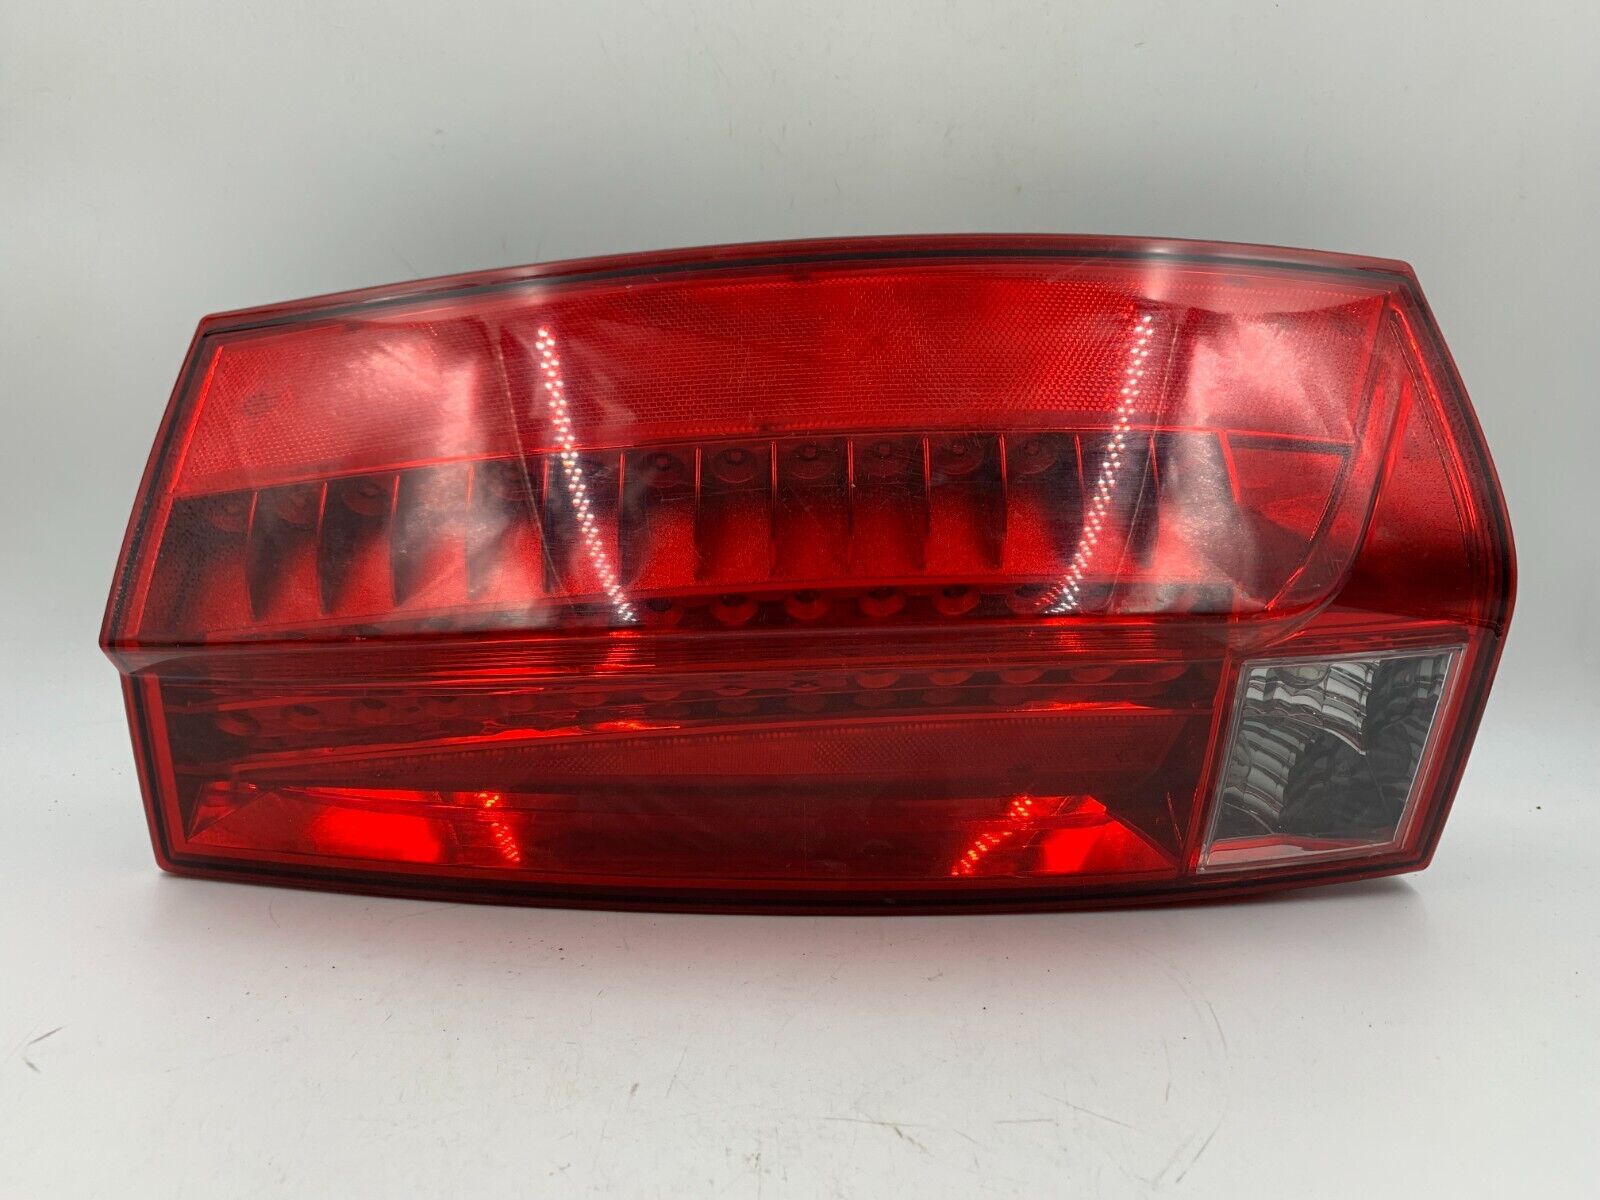 2007-2014 Cadillac Escalade Passenger Side Tail Light w/out Premium OE M04B13001 - $179.99